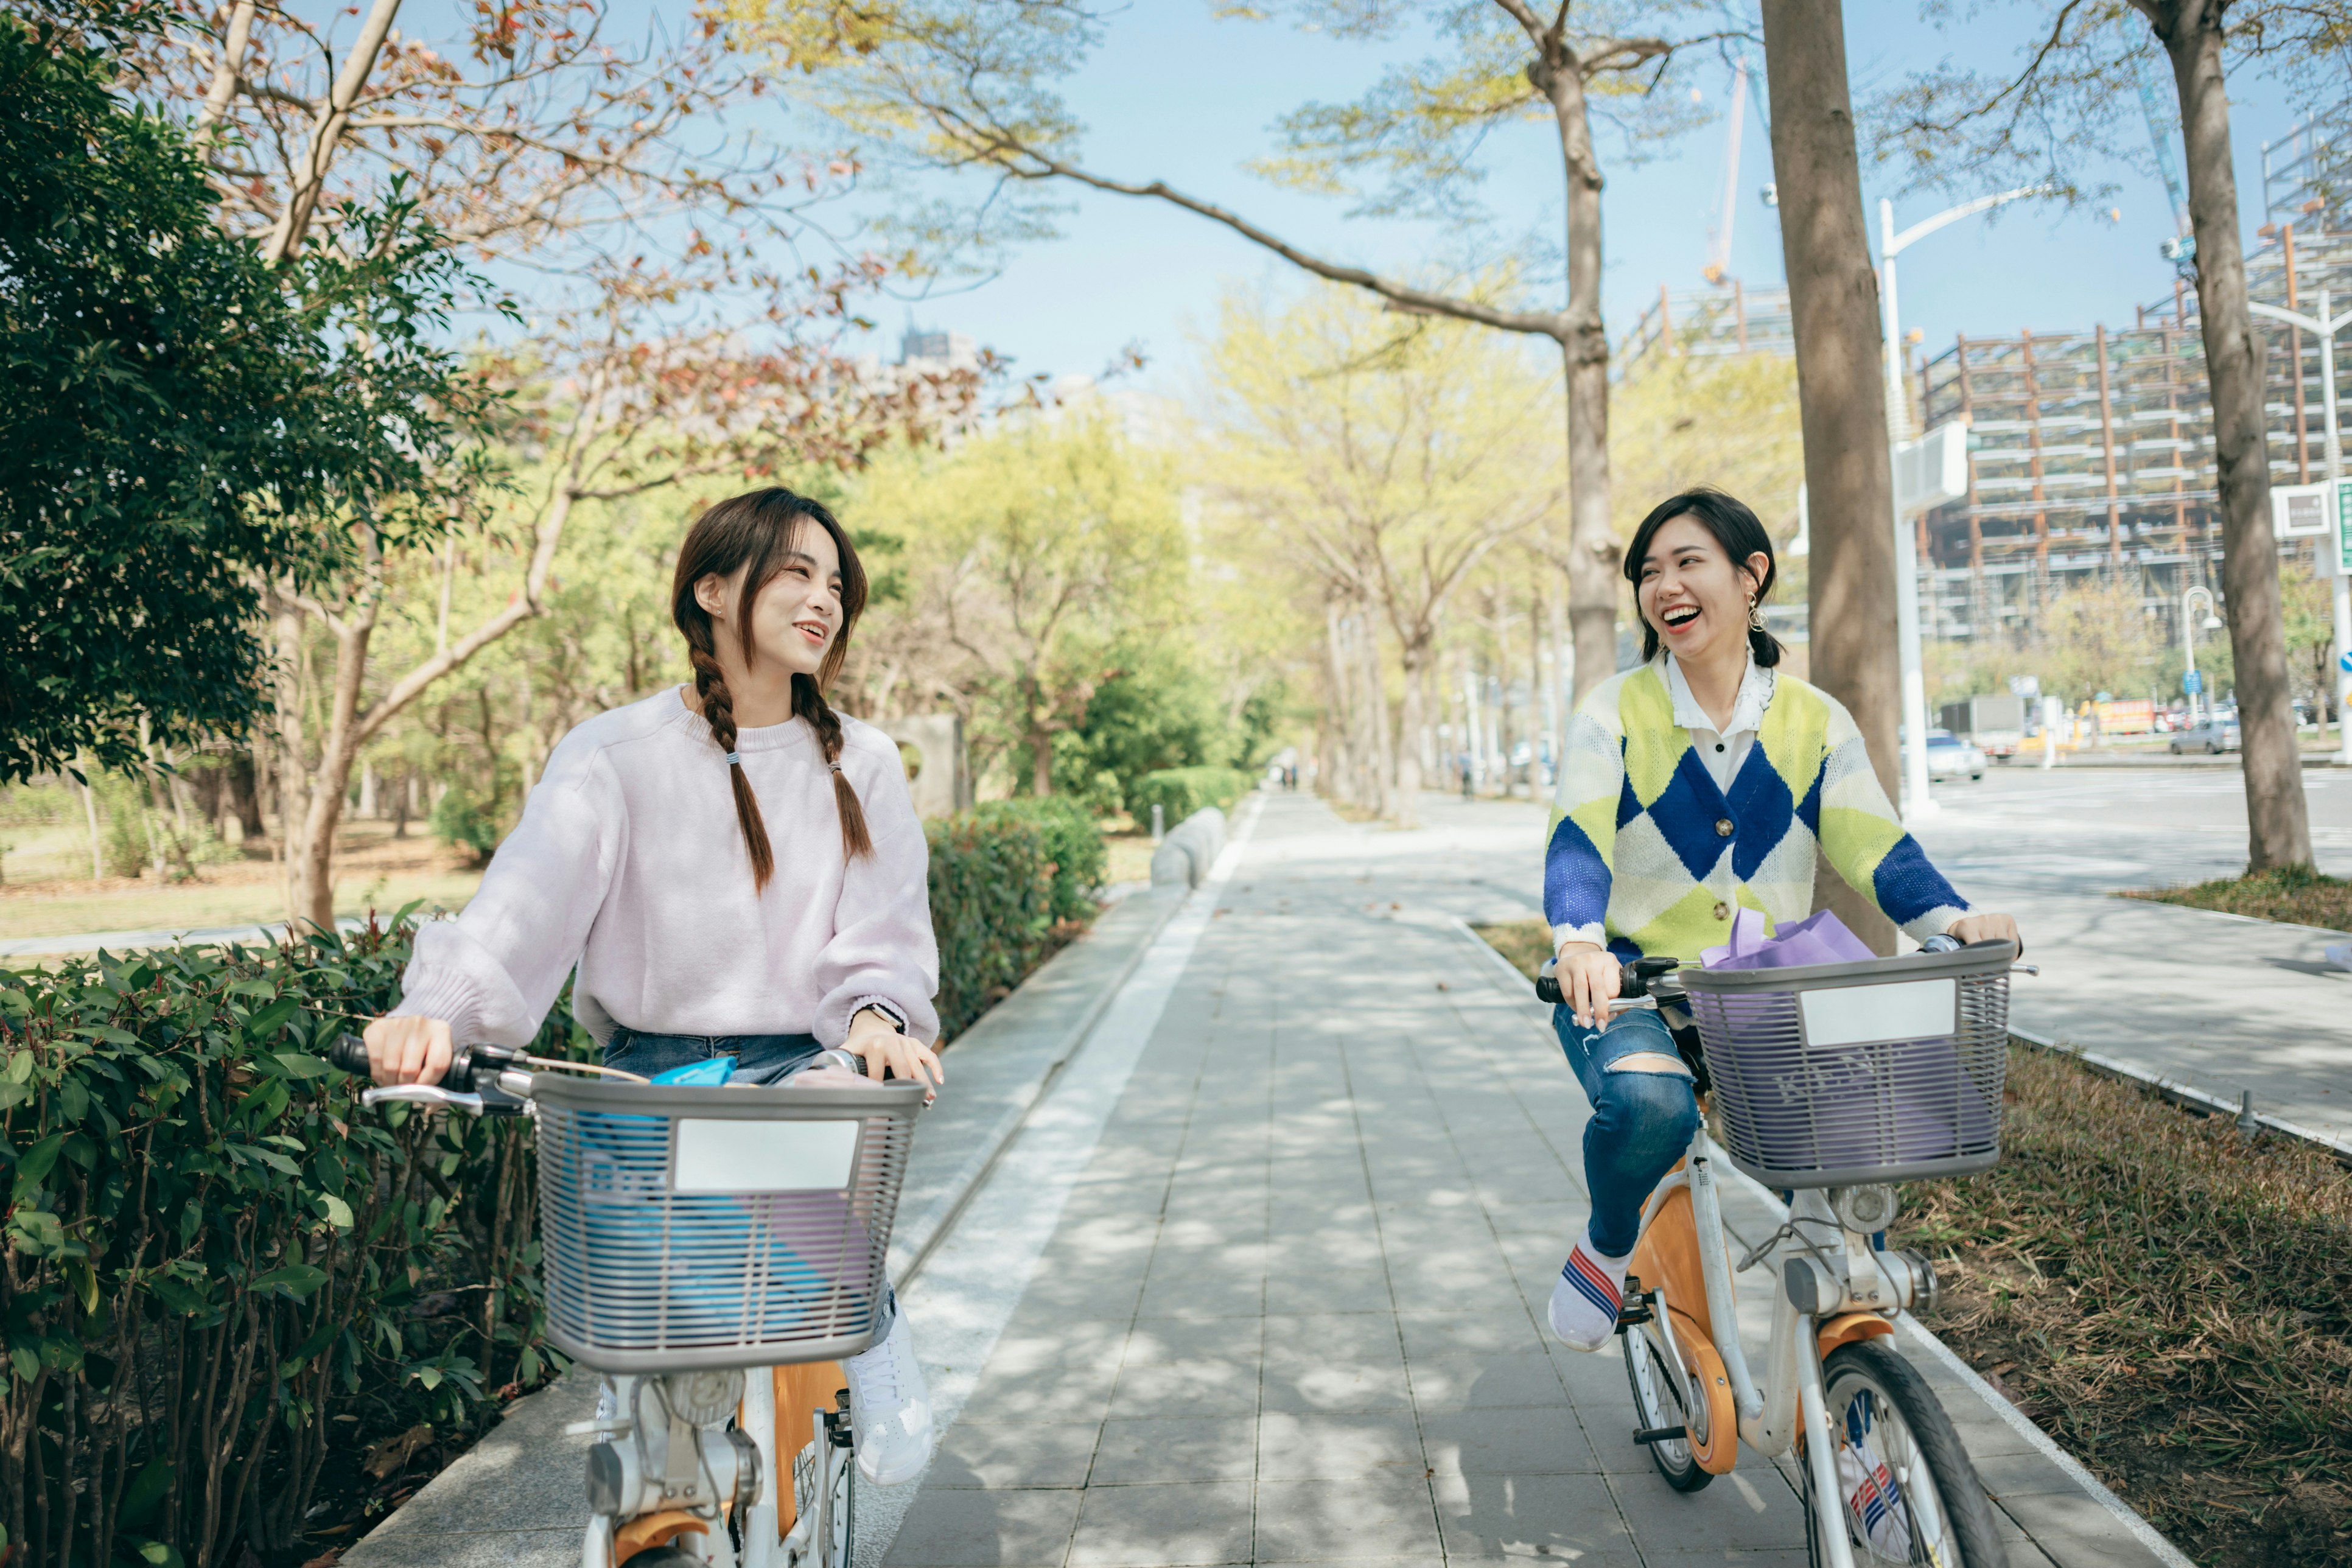 Two asian women renting bicycles to travel in the city
1396026867